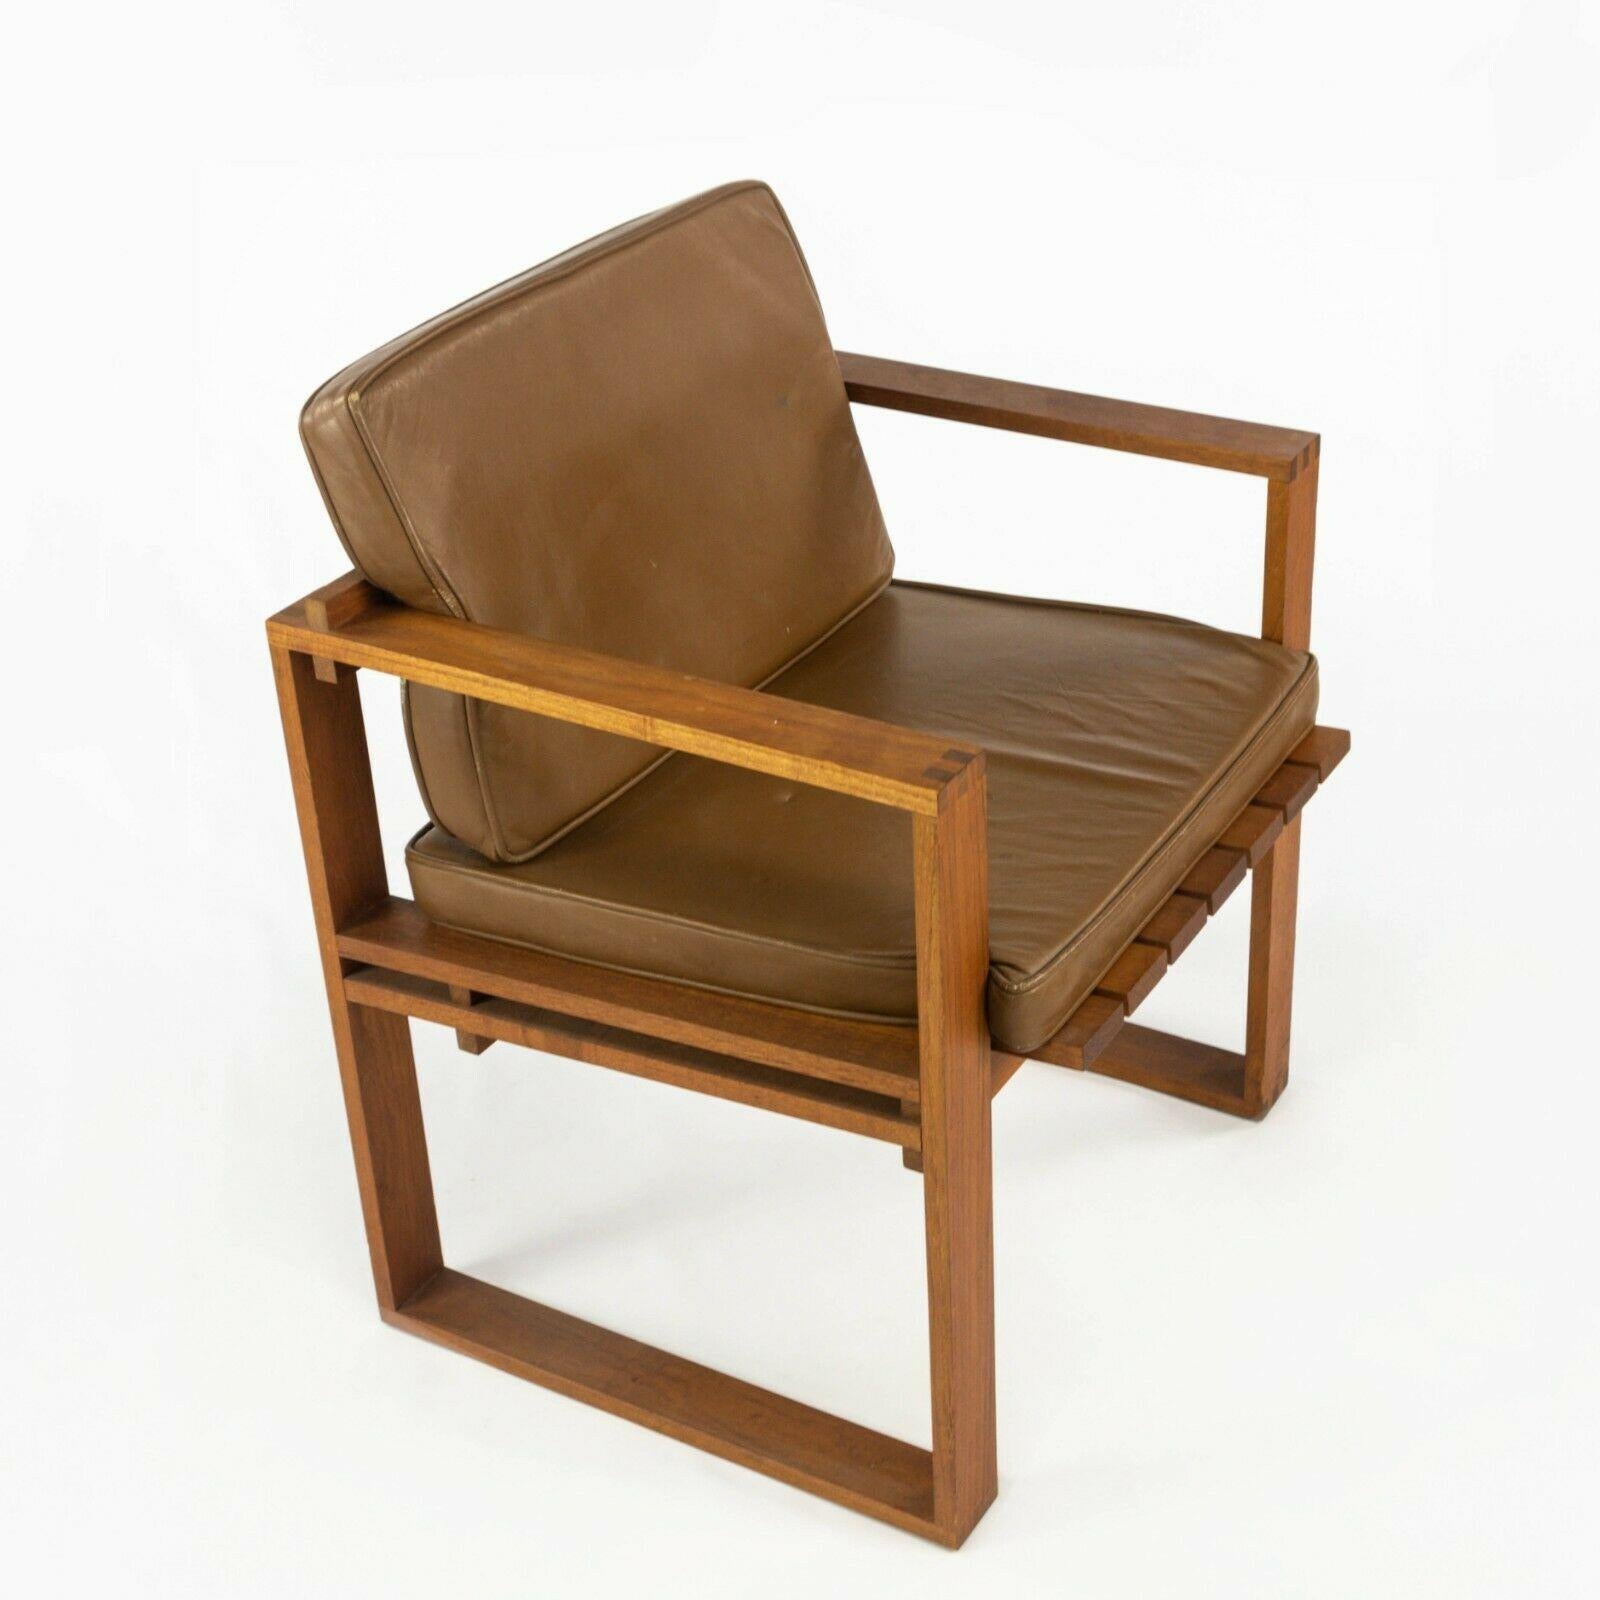 1975 Pair of Bodil Kjaer Teak & Leather Slat Seat Chairs by CI Designs of Boston For Sale 5